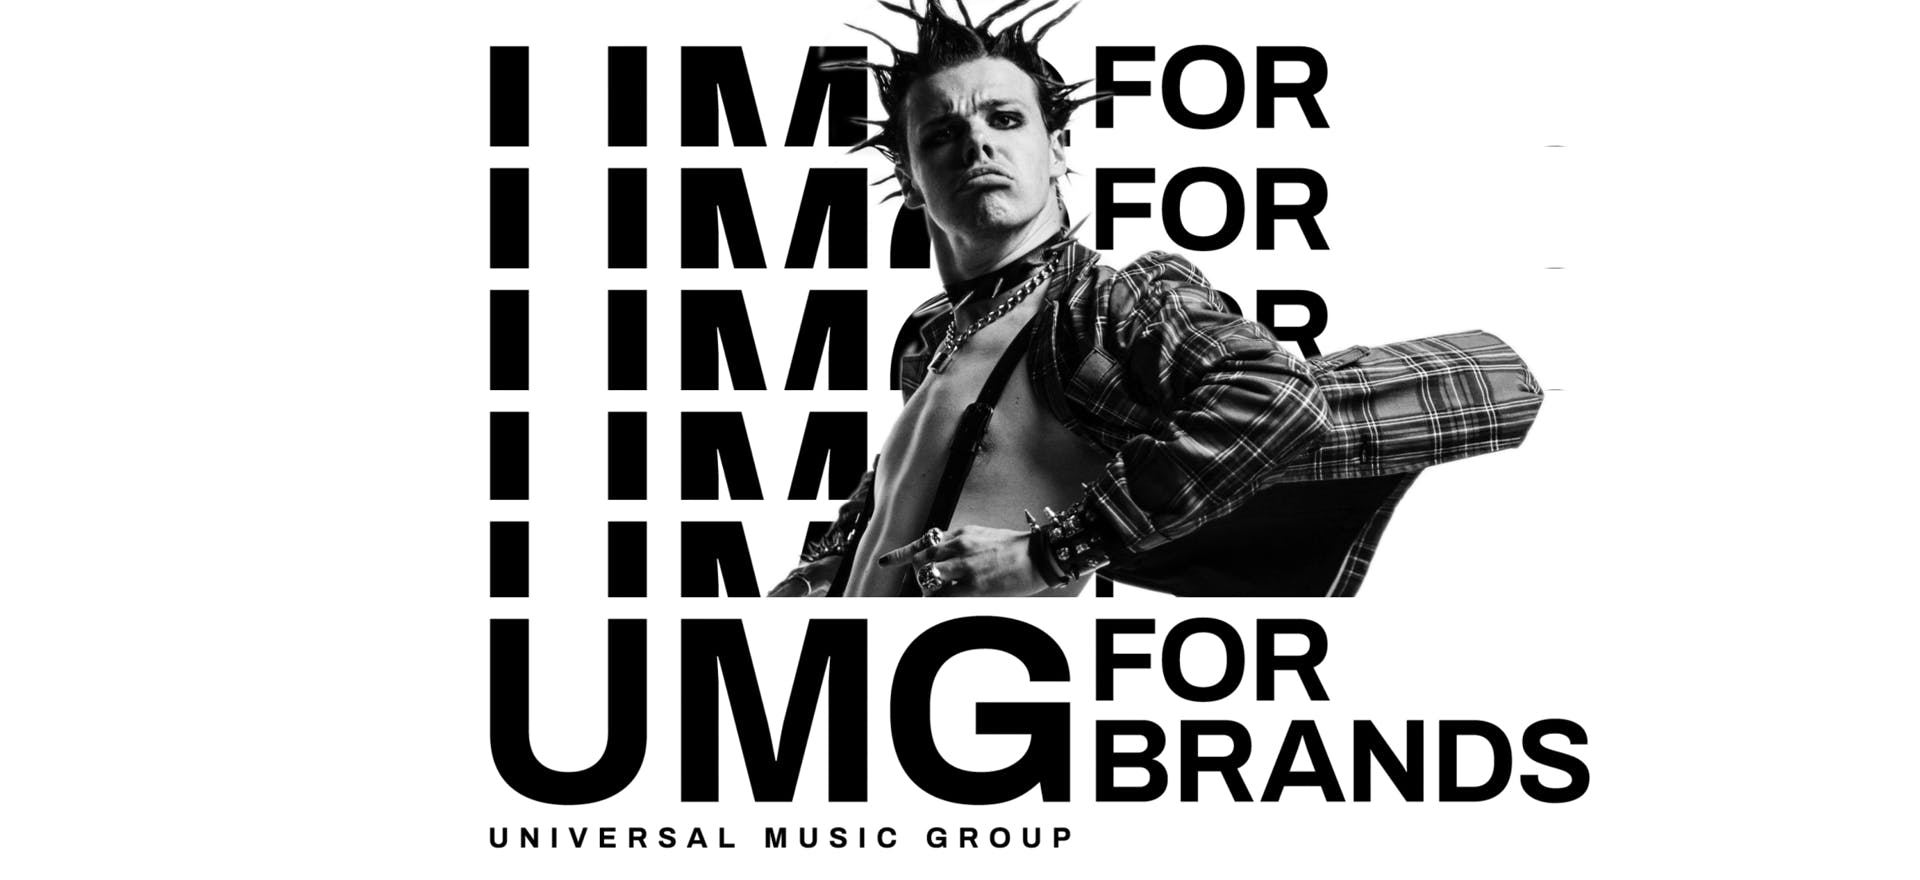 UNIVERSAL MUSIC GROUP AND AUTHENTIC BRANDS GROUP ANNOUNCE STRATEGIC  INITIATIVE TO ACQUIRE AND ACTIVELY MANAGE ARTIST BRANDS - UMG